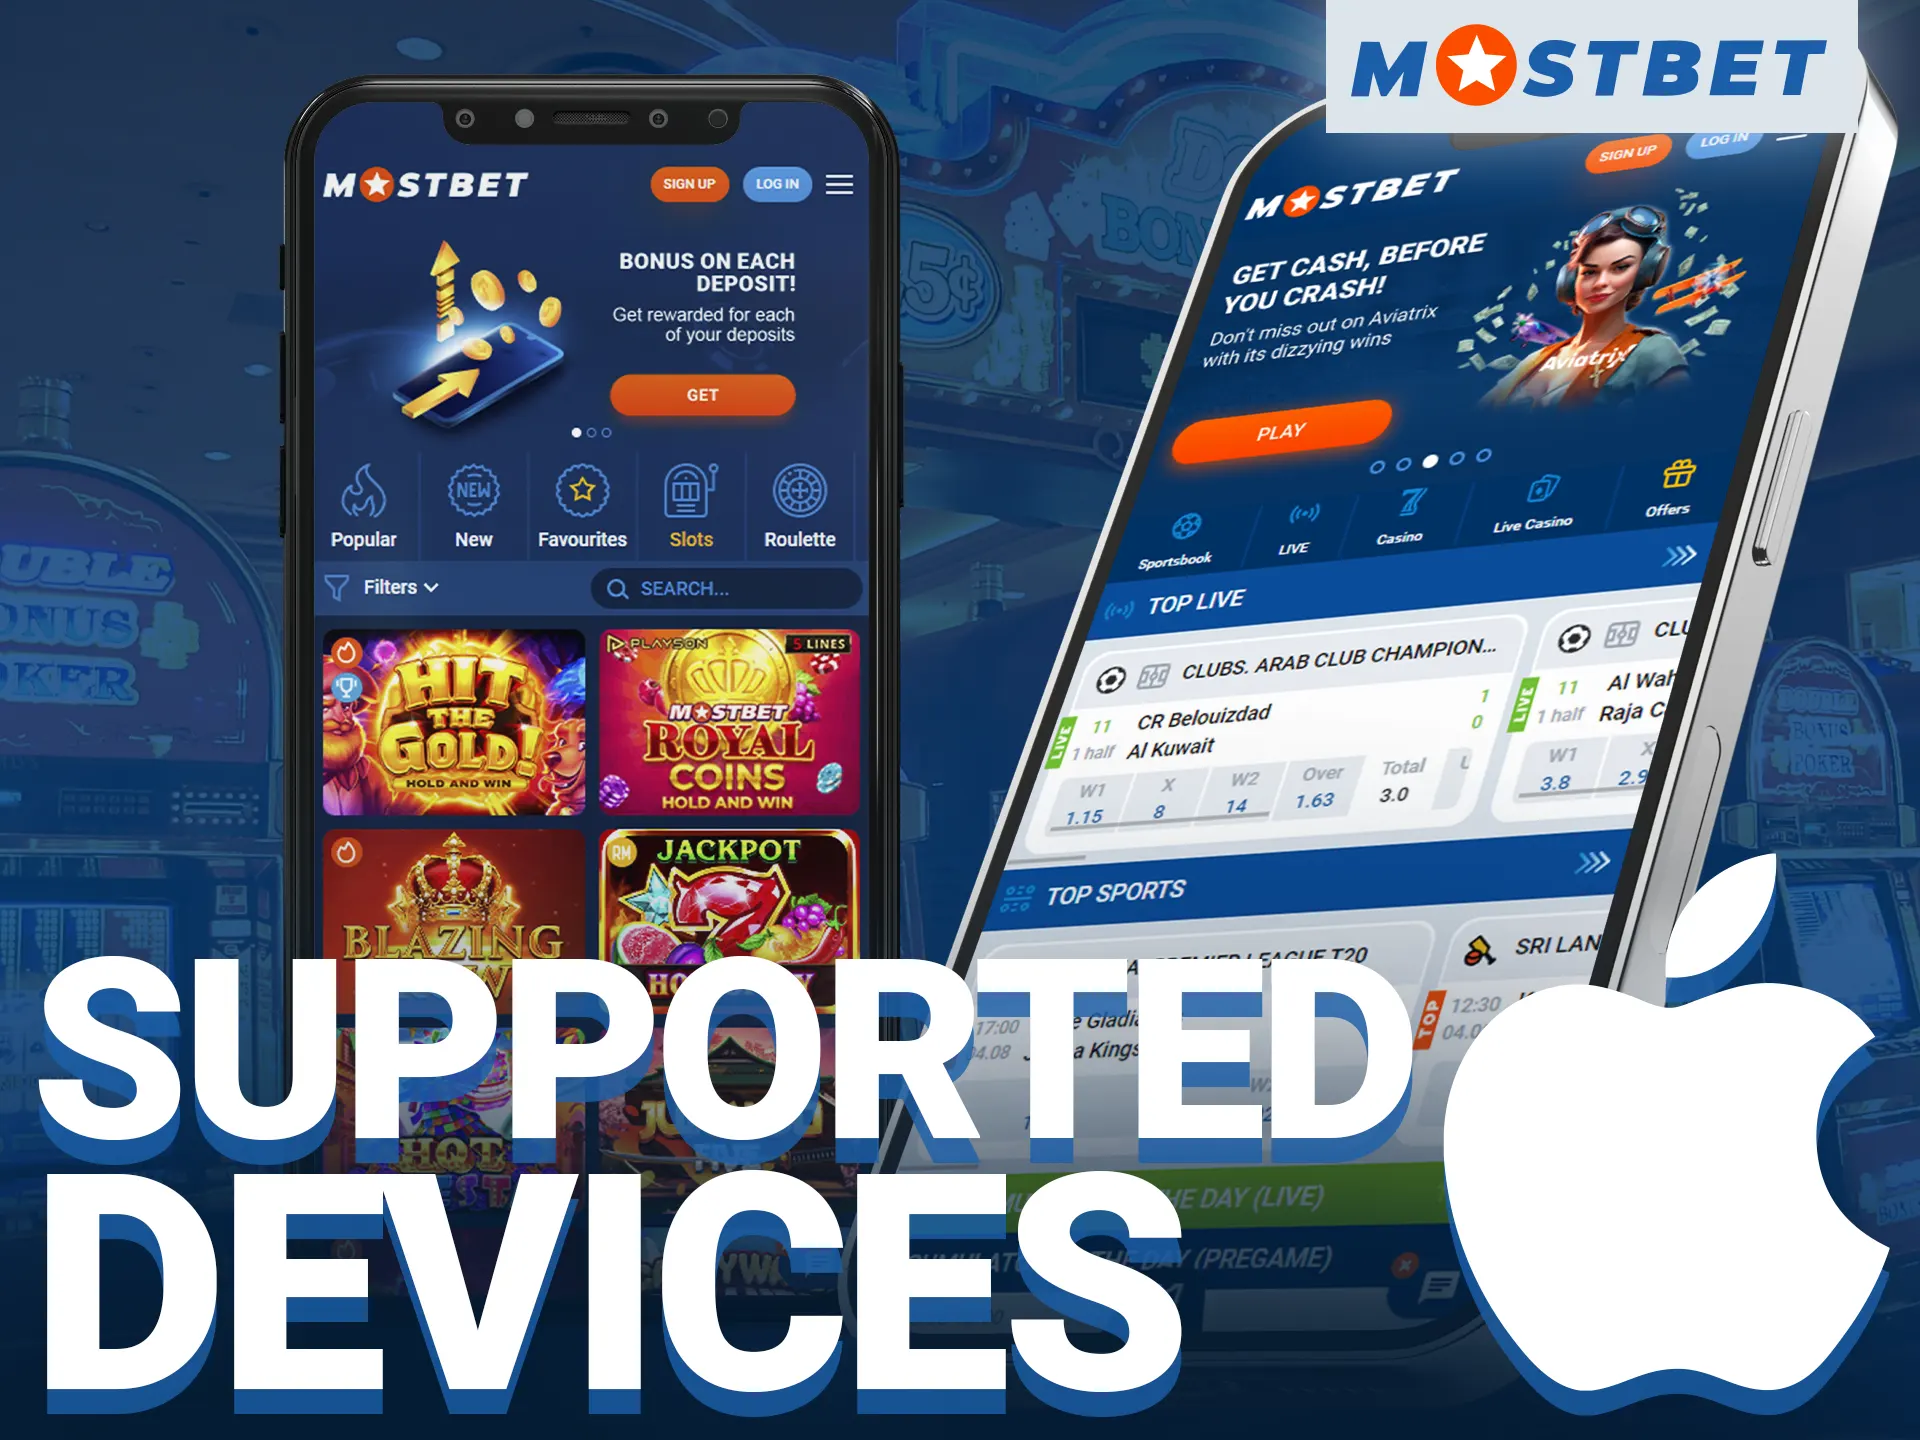 Download the Mostbet app to your iOS device.